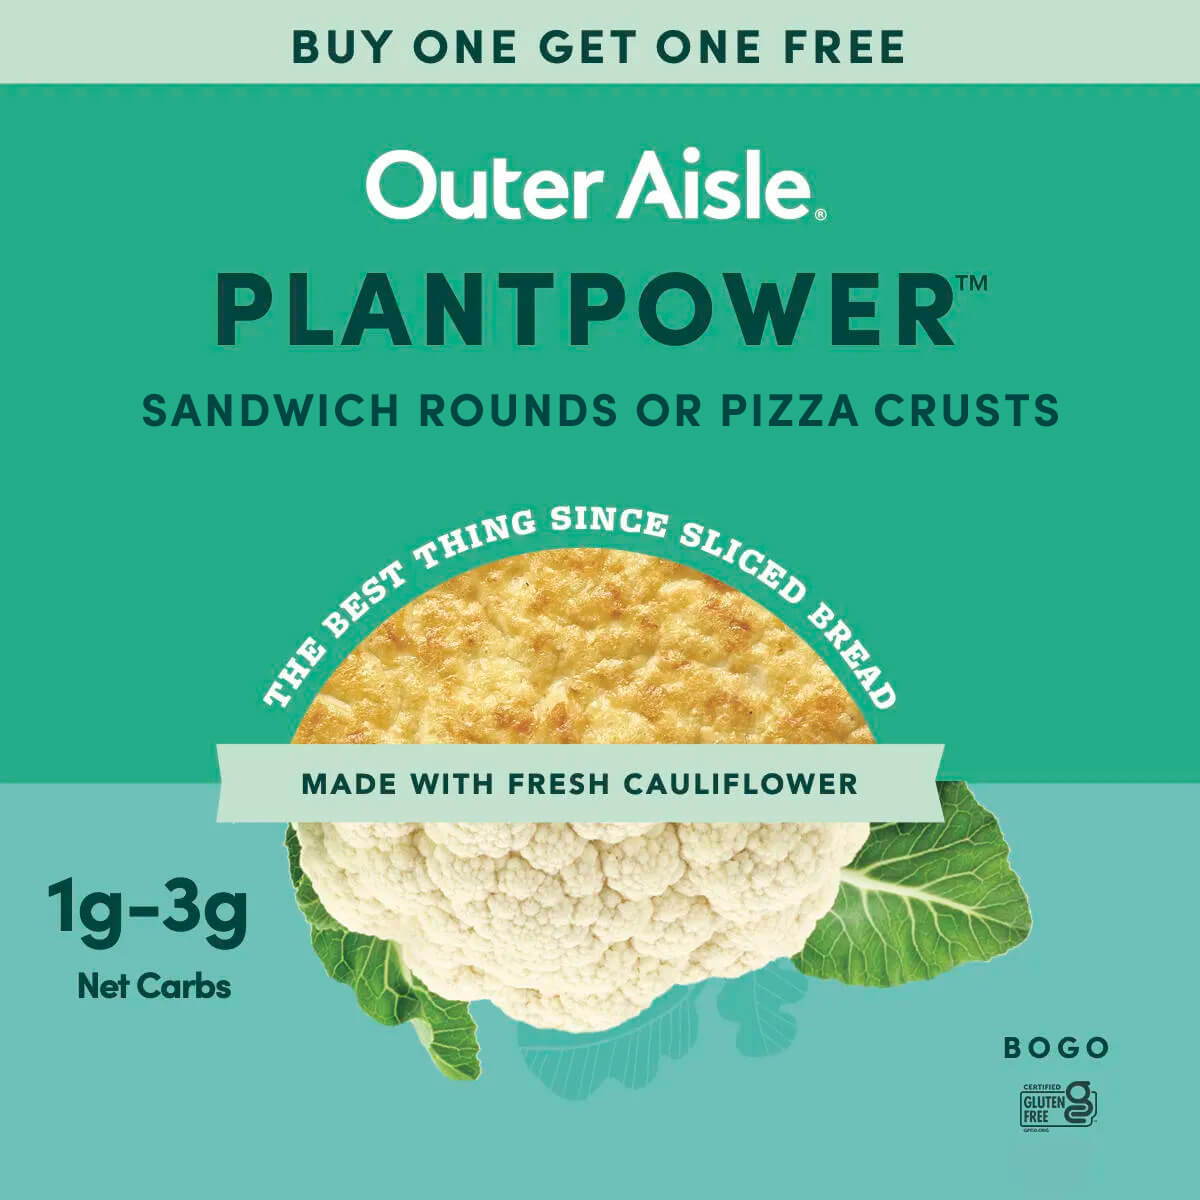 buy one outer aisle item, get one free banner with pizza crusts and sandwich rounds